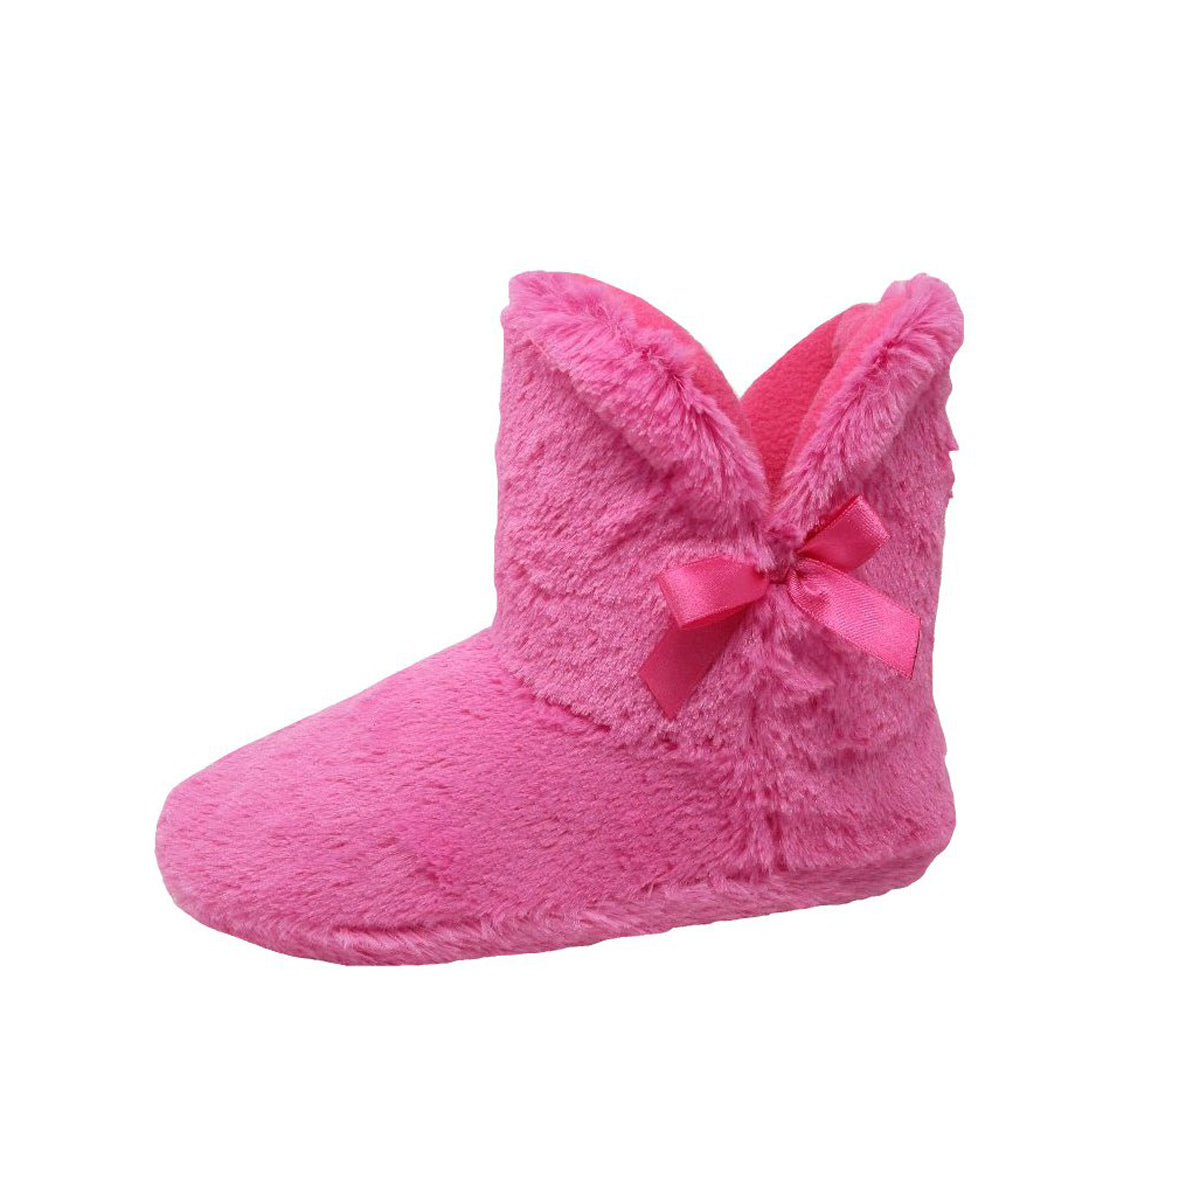 Fluffy Slipper Boots / slippers soft feel with side bow